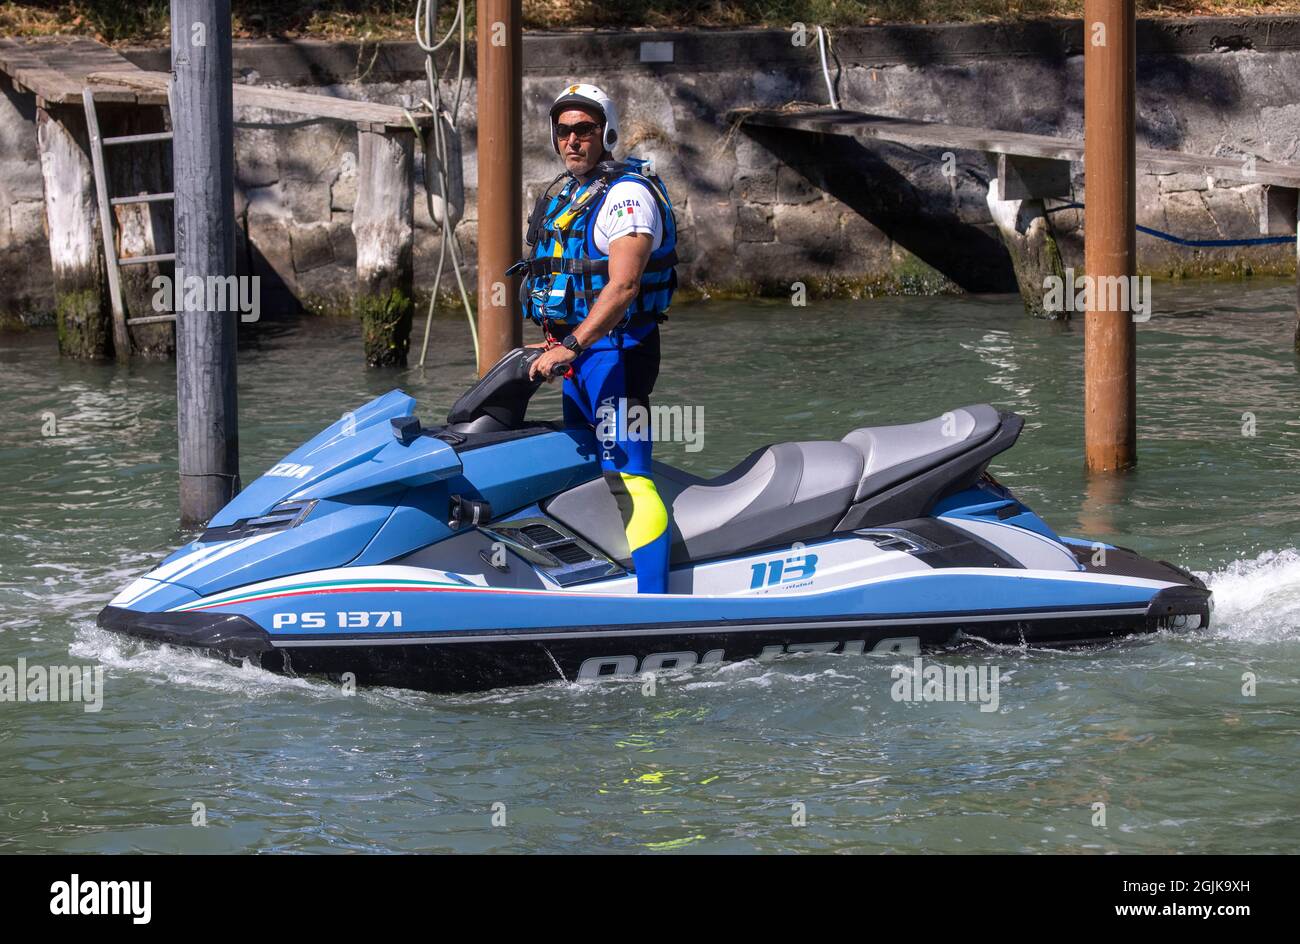 A policeman on a jetski in Venice patrolling the canal during Venice film festival. Stock Photo